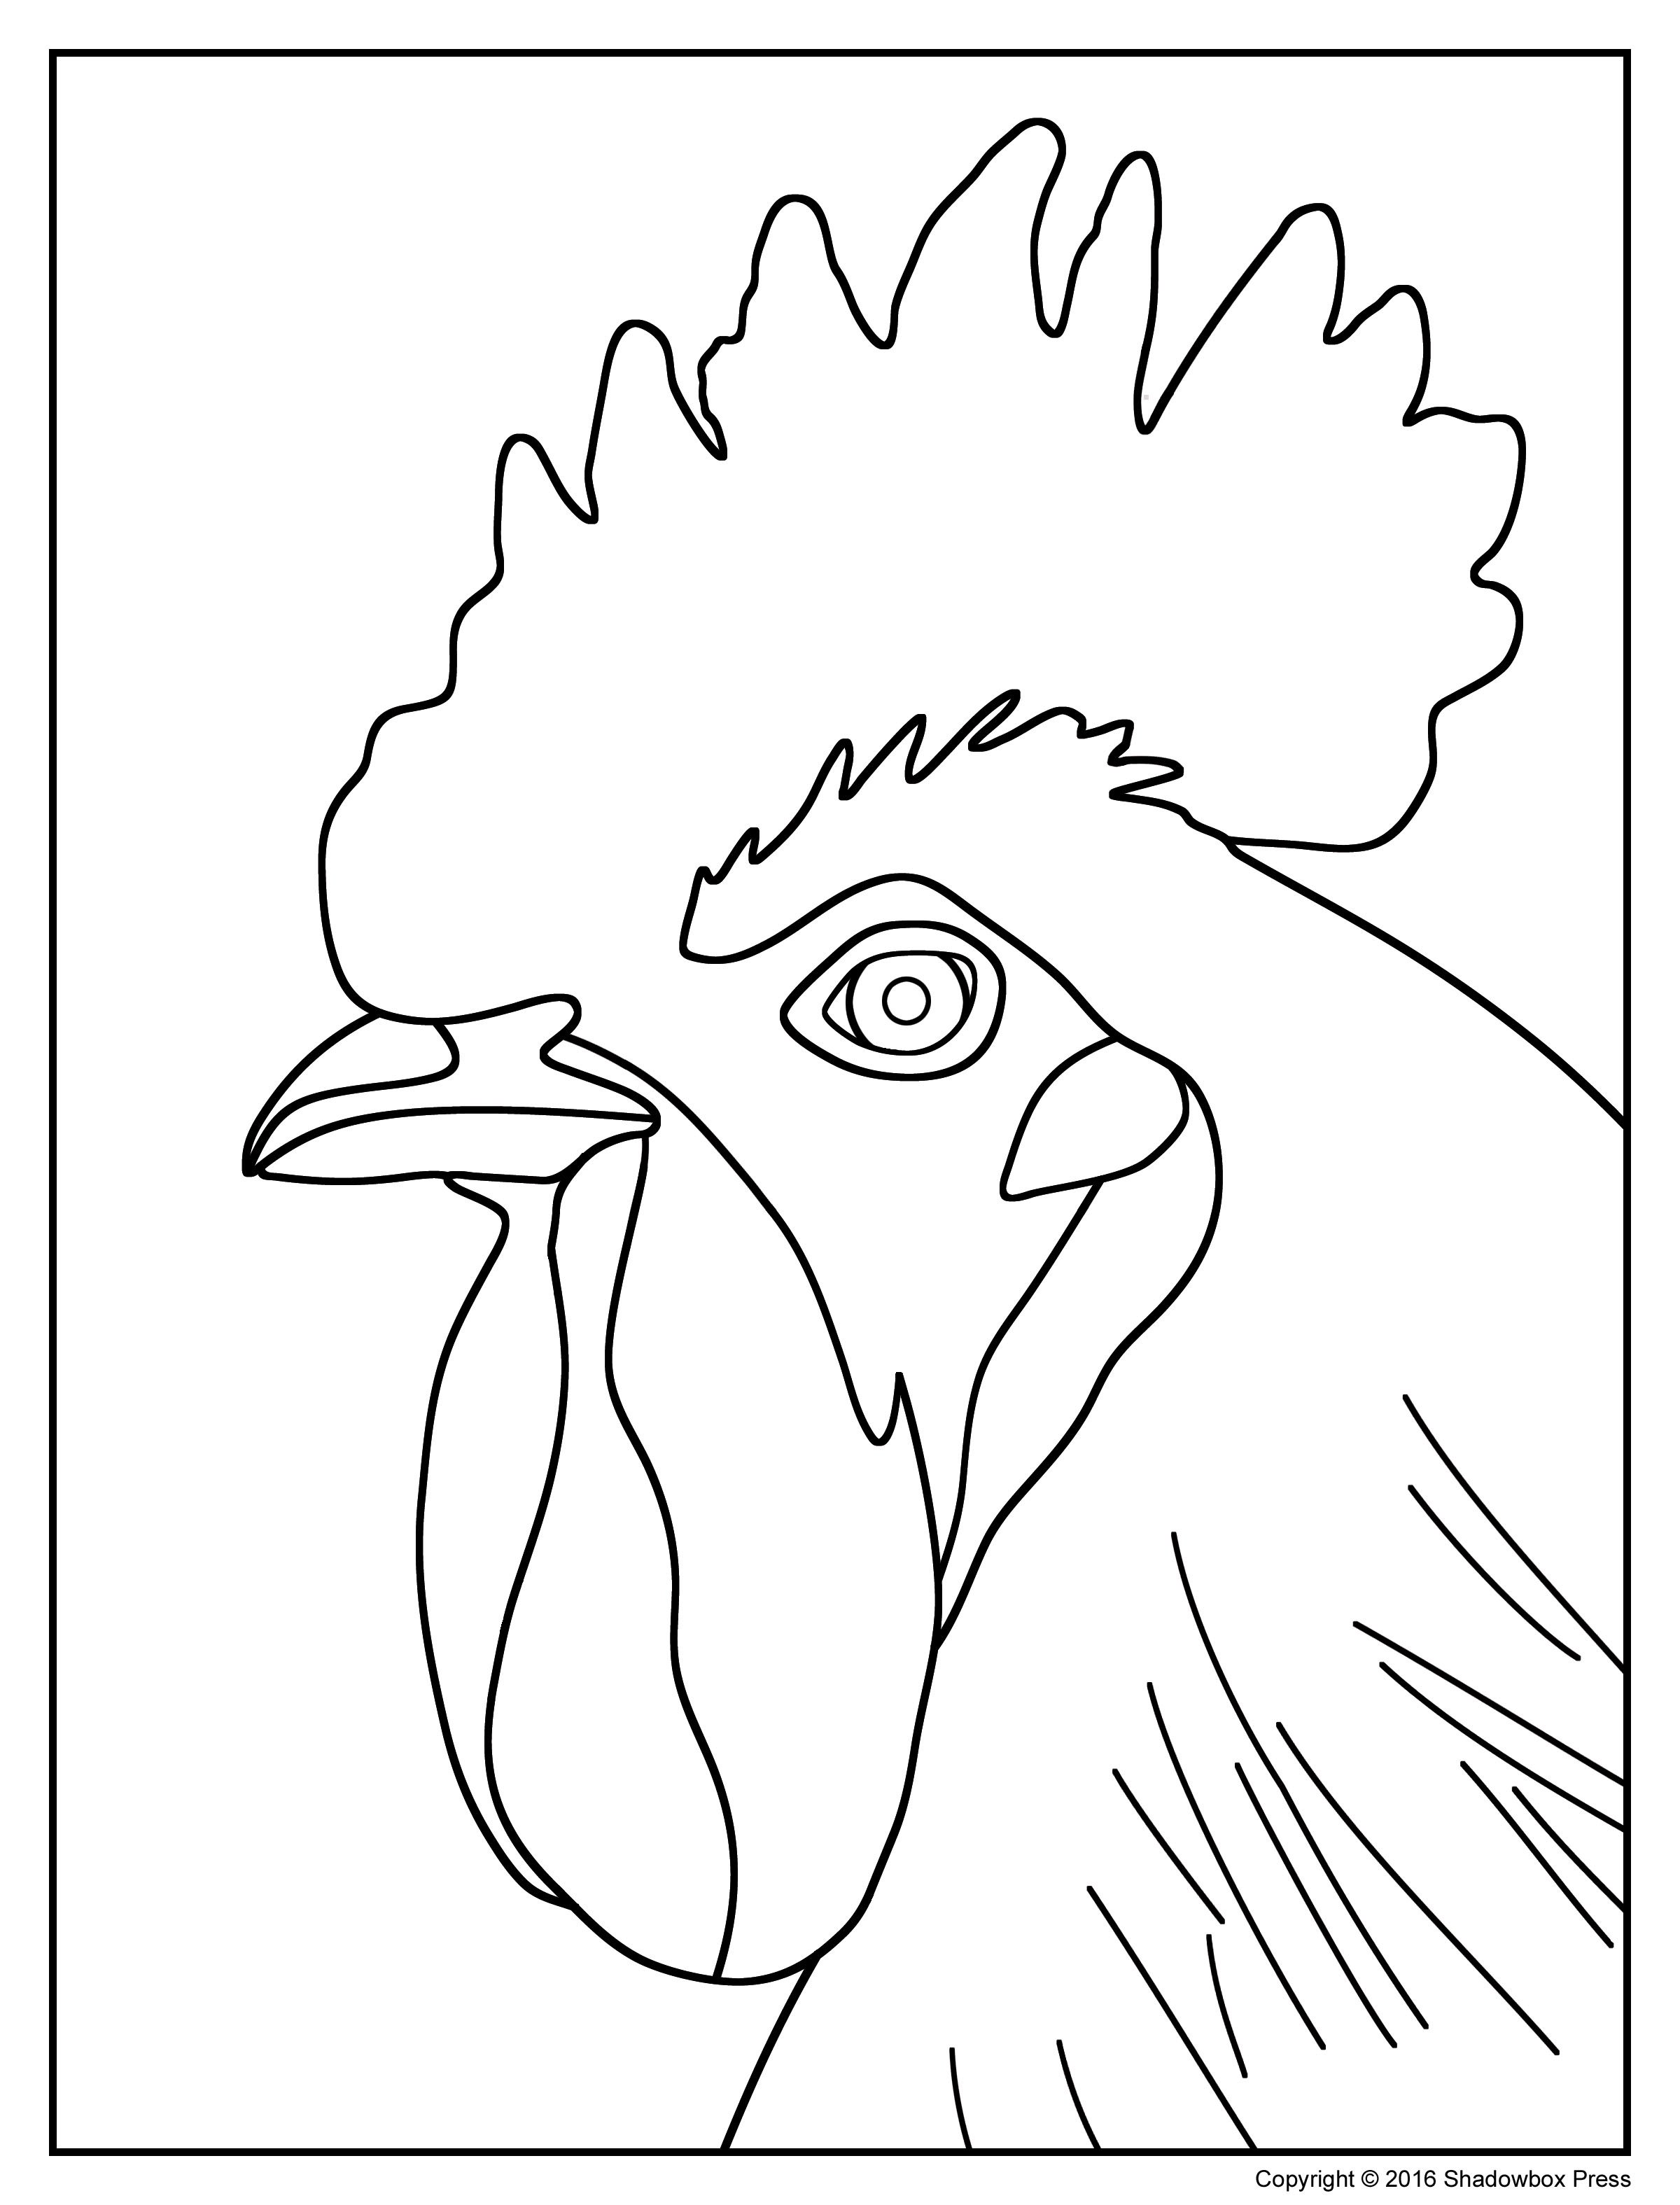 Coloring Pages For Older Adults at GetDrawings | Free download